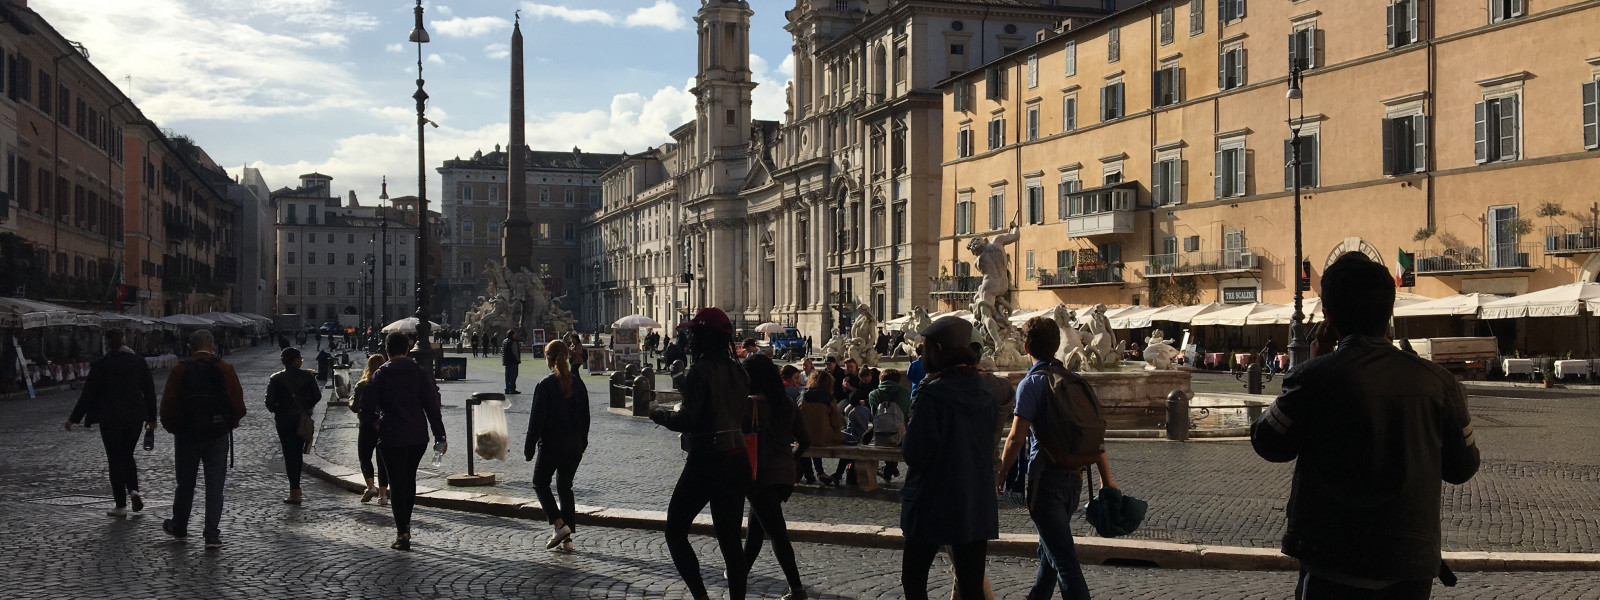 A line of students, in silhouette, walk through a public square in Rome.